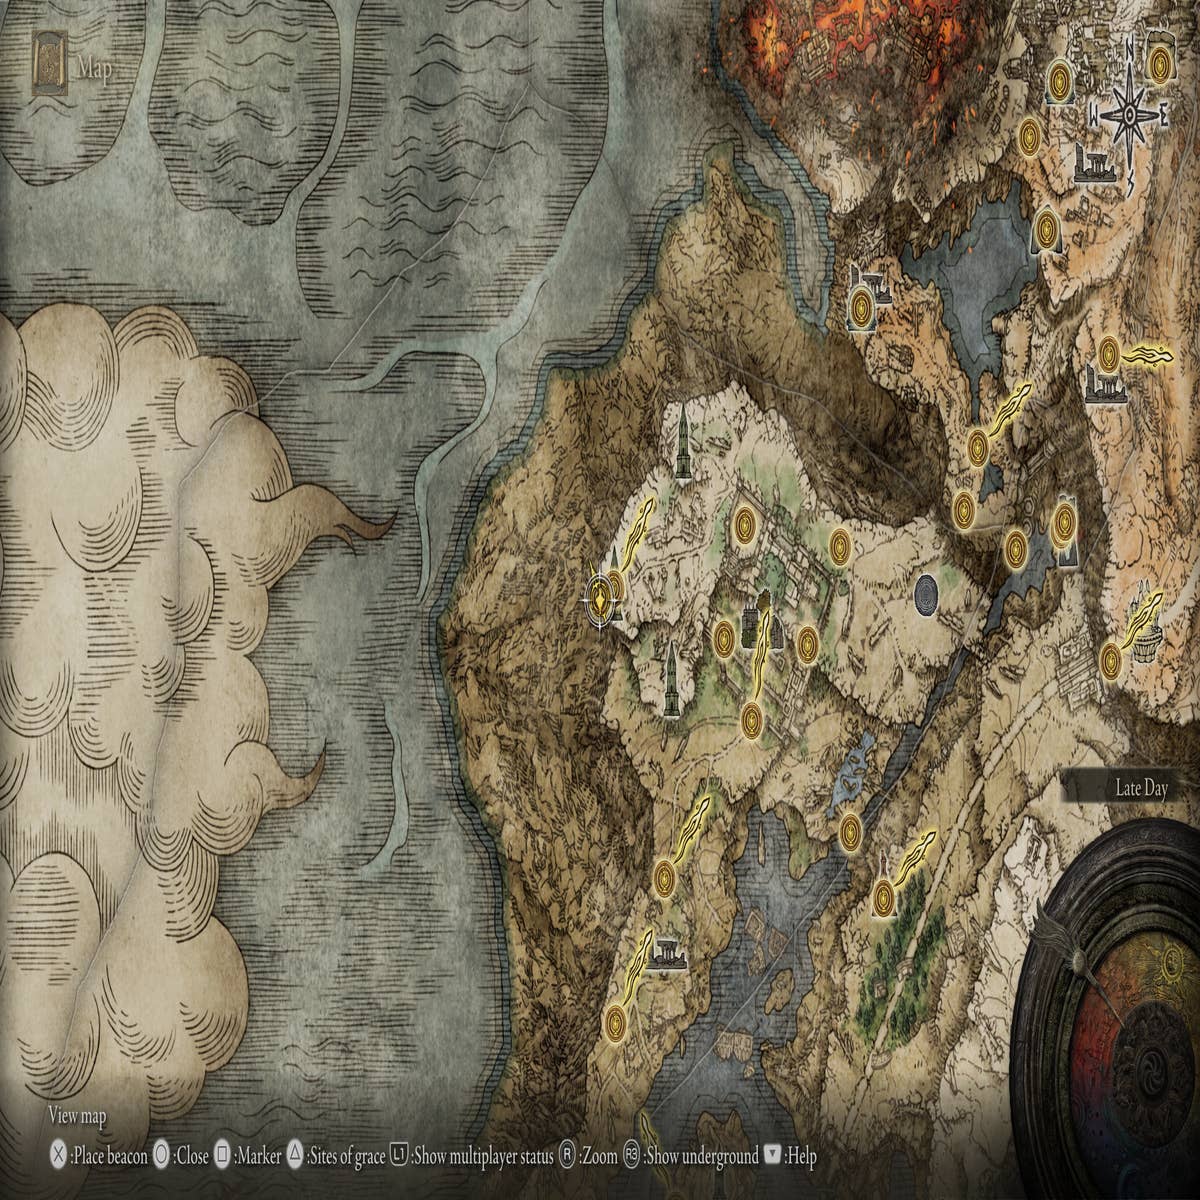 Elden Ring - Ranni Questline and Locations (Age of the Stars Ending) 